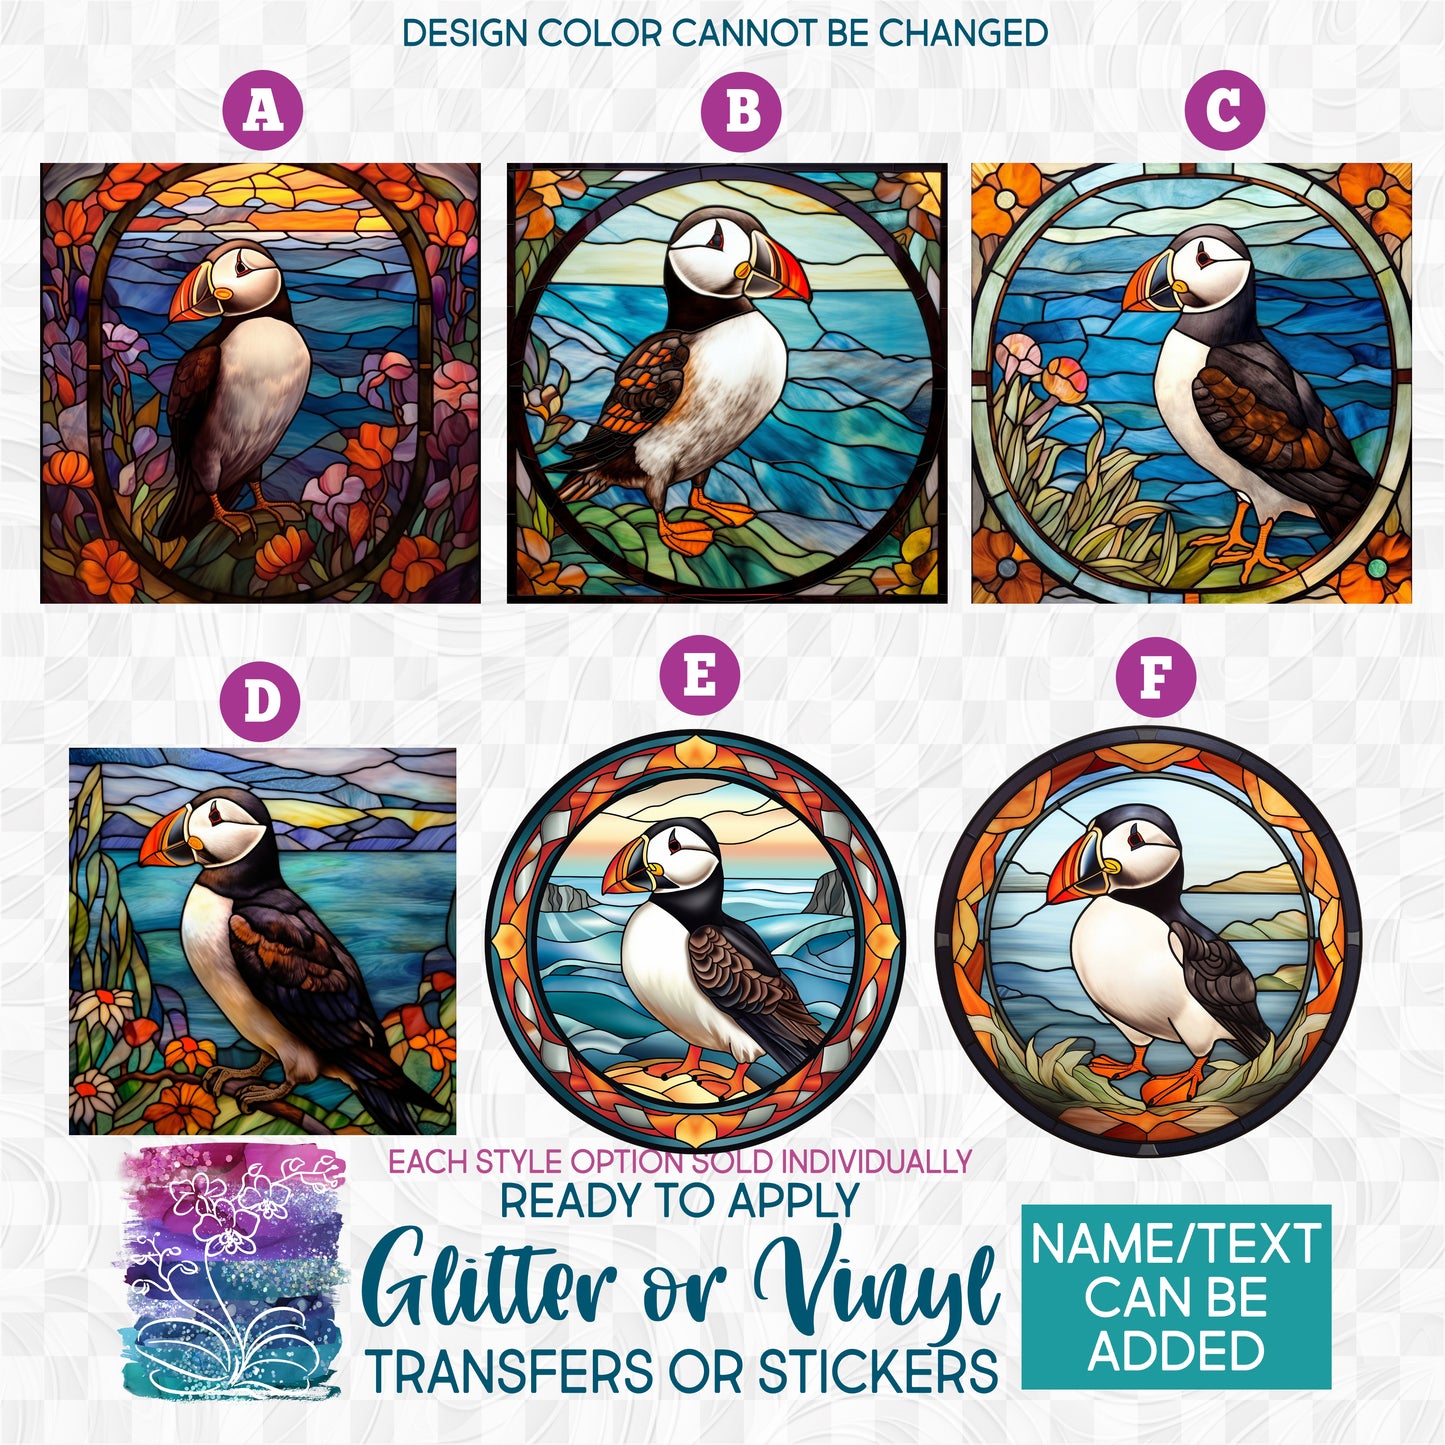 (s150-26) Stained-Glass Puffin Puffins Glitter or Vinyl Iron-On Transfer or Sticker